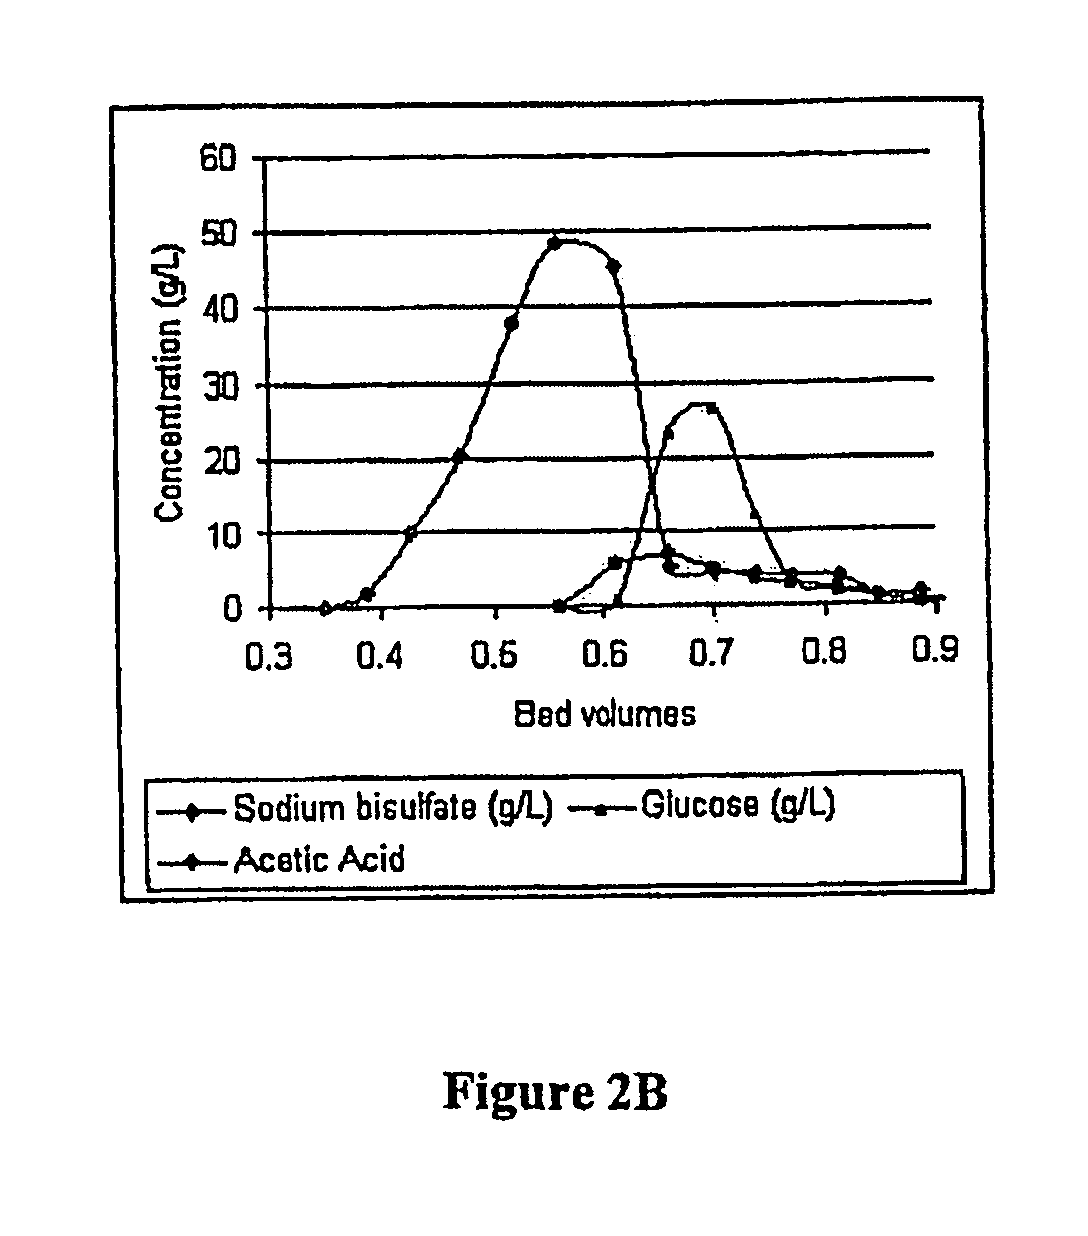 Method of obtaining a product sugar stream from cellulosic biomass